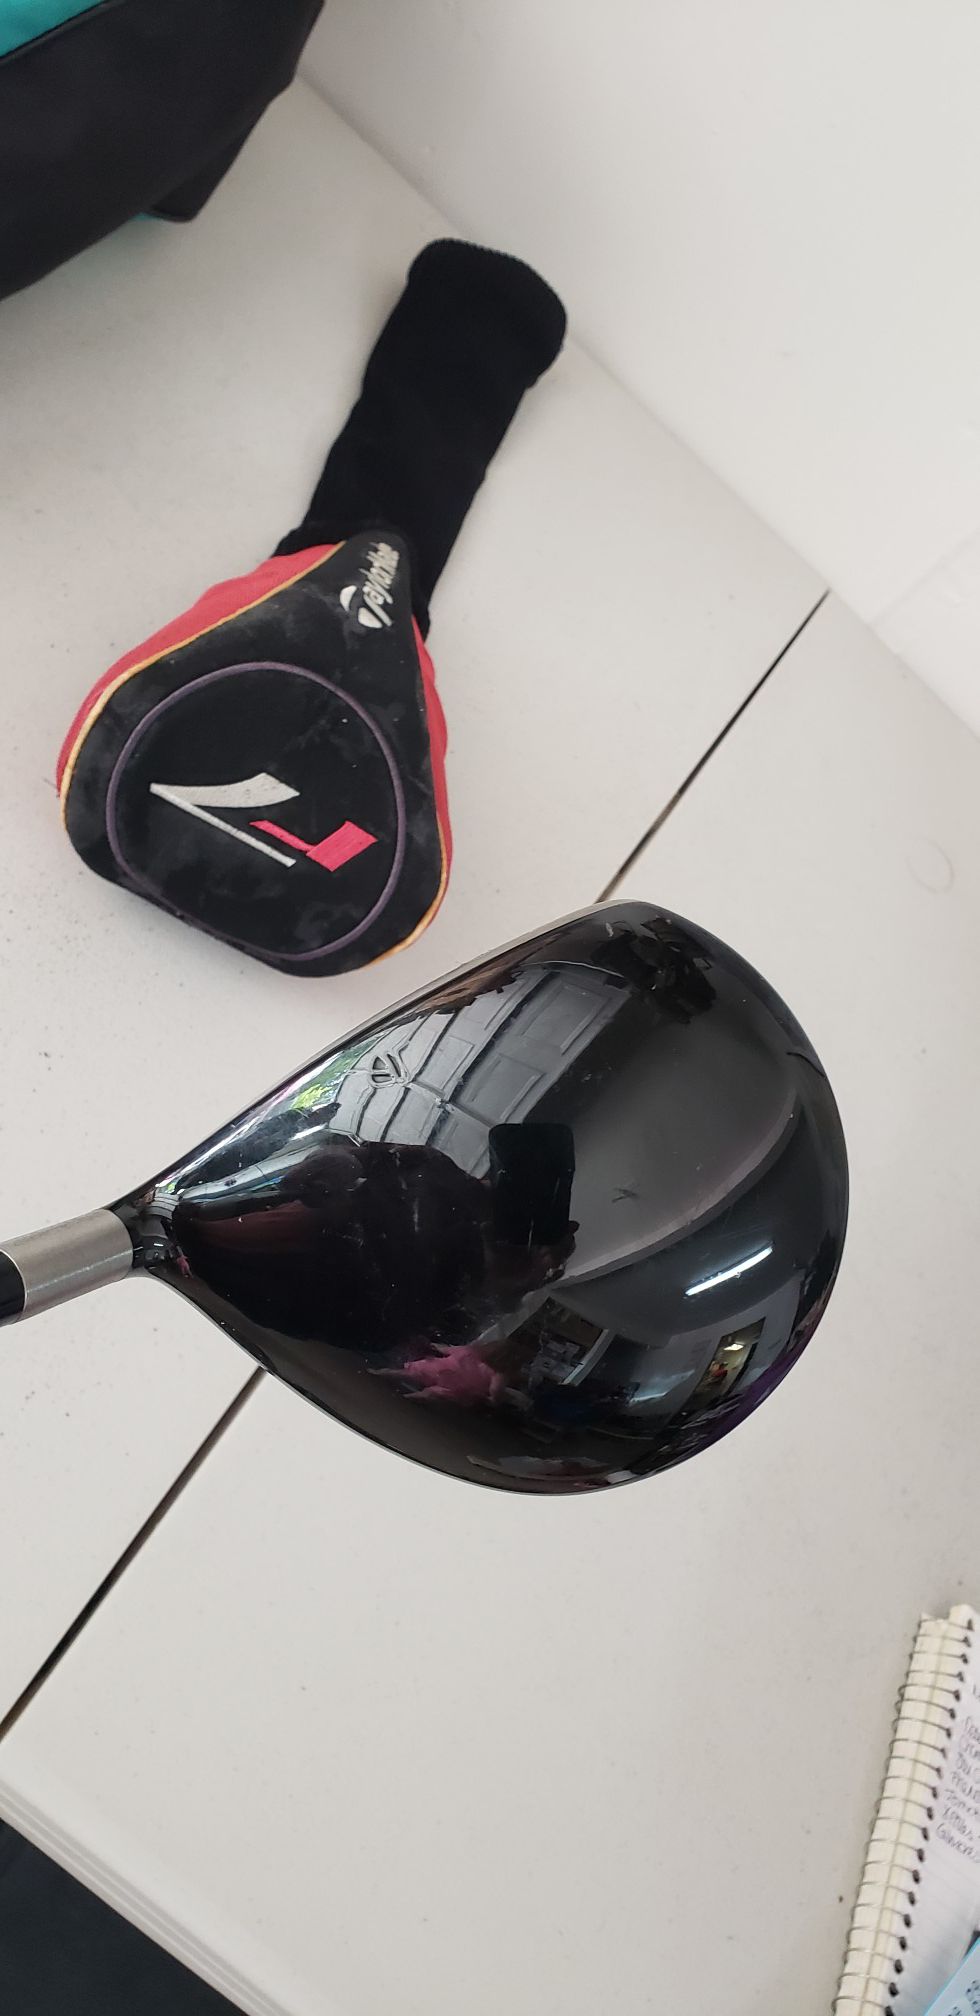 Taylormade R7 9.5 degree driver, w/S flex shaft and head cover